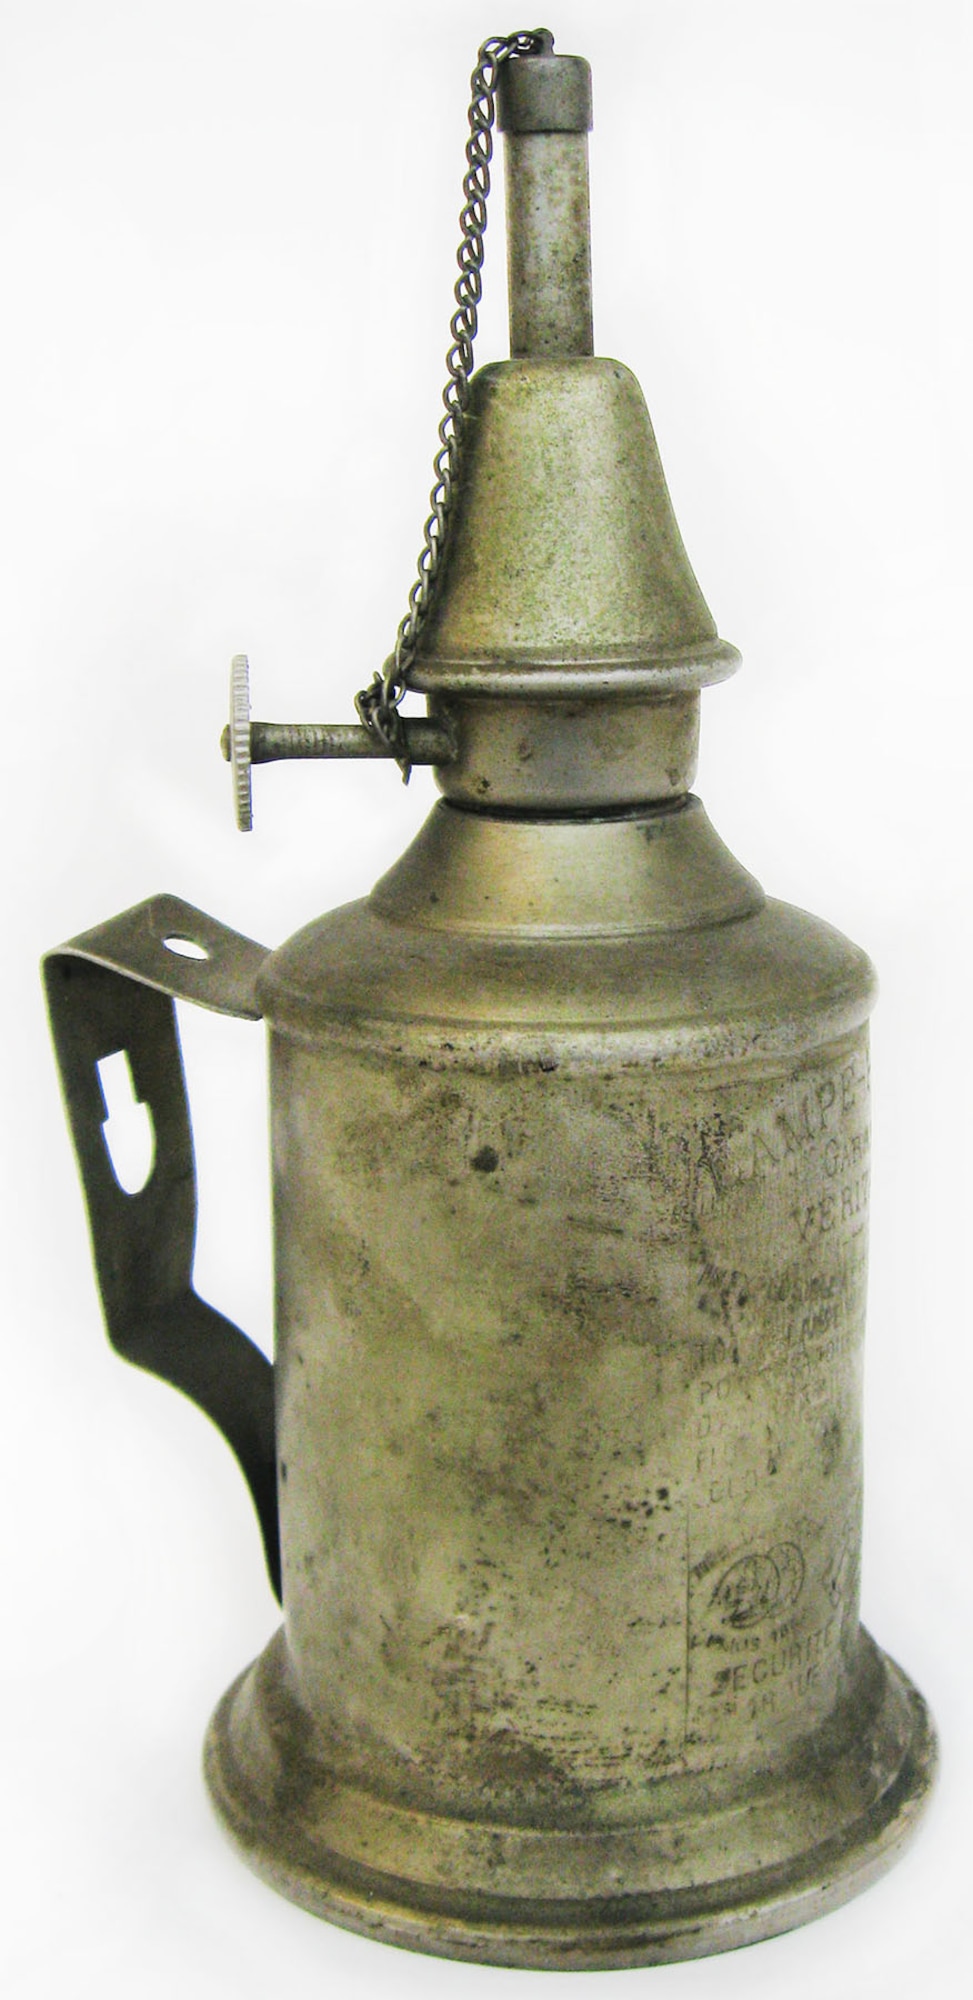 This kerosene lamp was used during World War I by Sgt. 1st Class A.B. Curran of the 103rd Aero Squadron, American Expeditionary Force, Air Service. This lamp was manufactured to burn mineral spirits but could also burn kerosene. Curran used kerosene to fuel this lamp as the supply of mineral spirits was limited during the war. (U.S. Air Force photo)